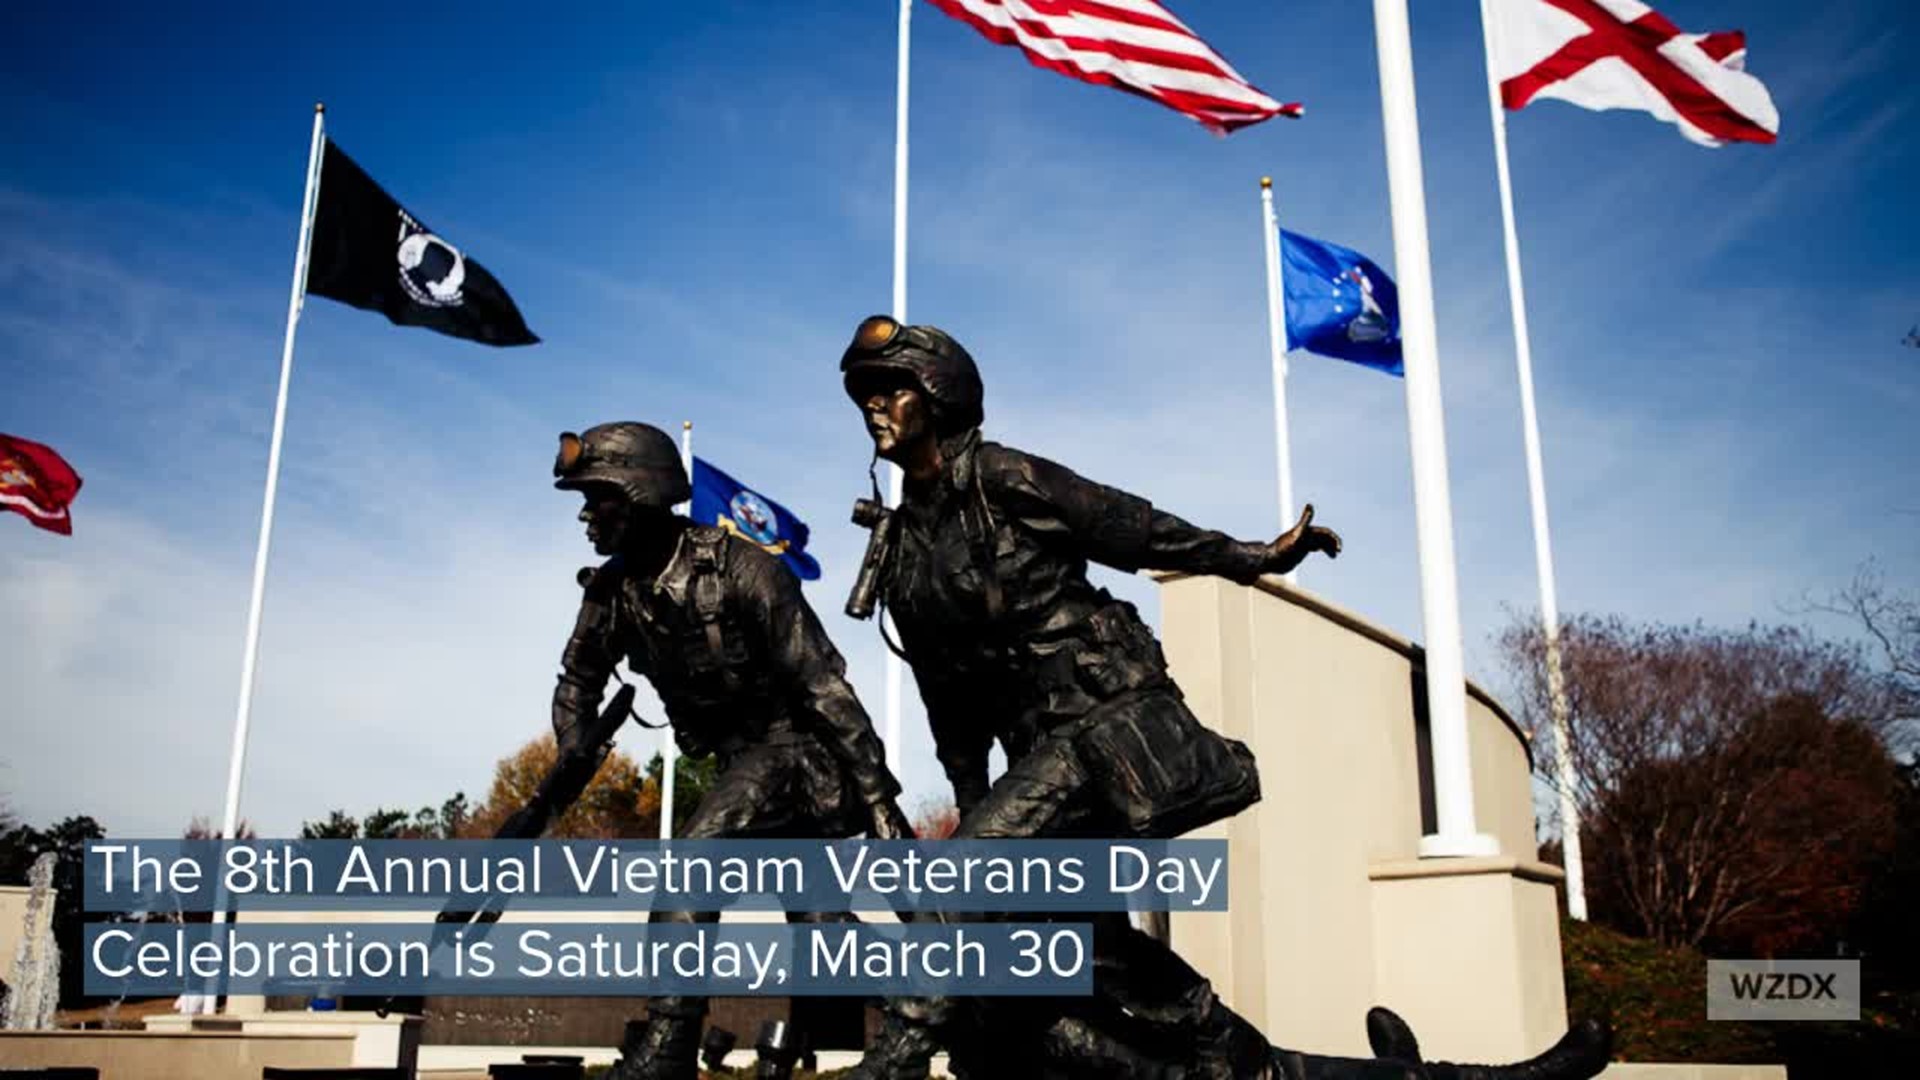 The 8th Annual Vietnam Veterans Recognition program will be Saturday, March 30 at the Huntsville Madison County Veterans Memorial.